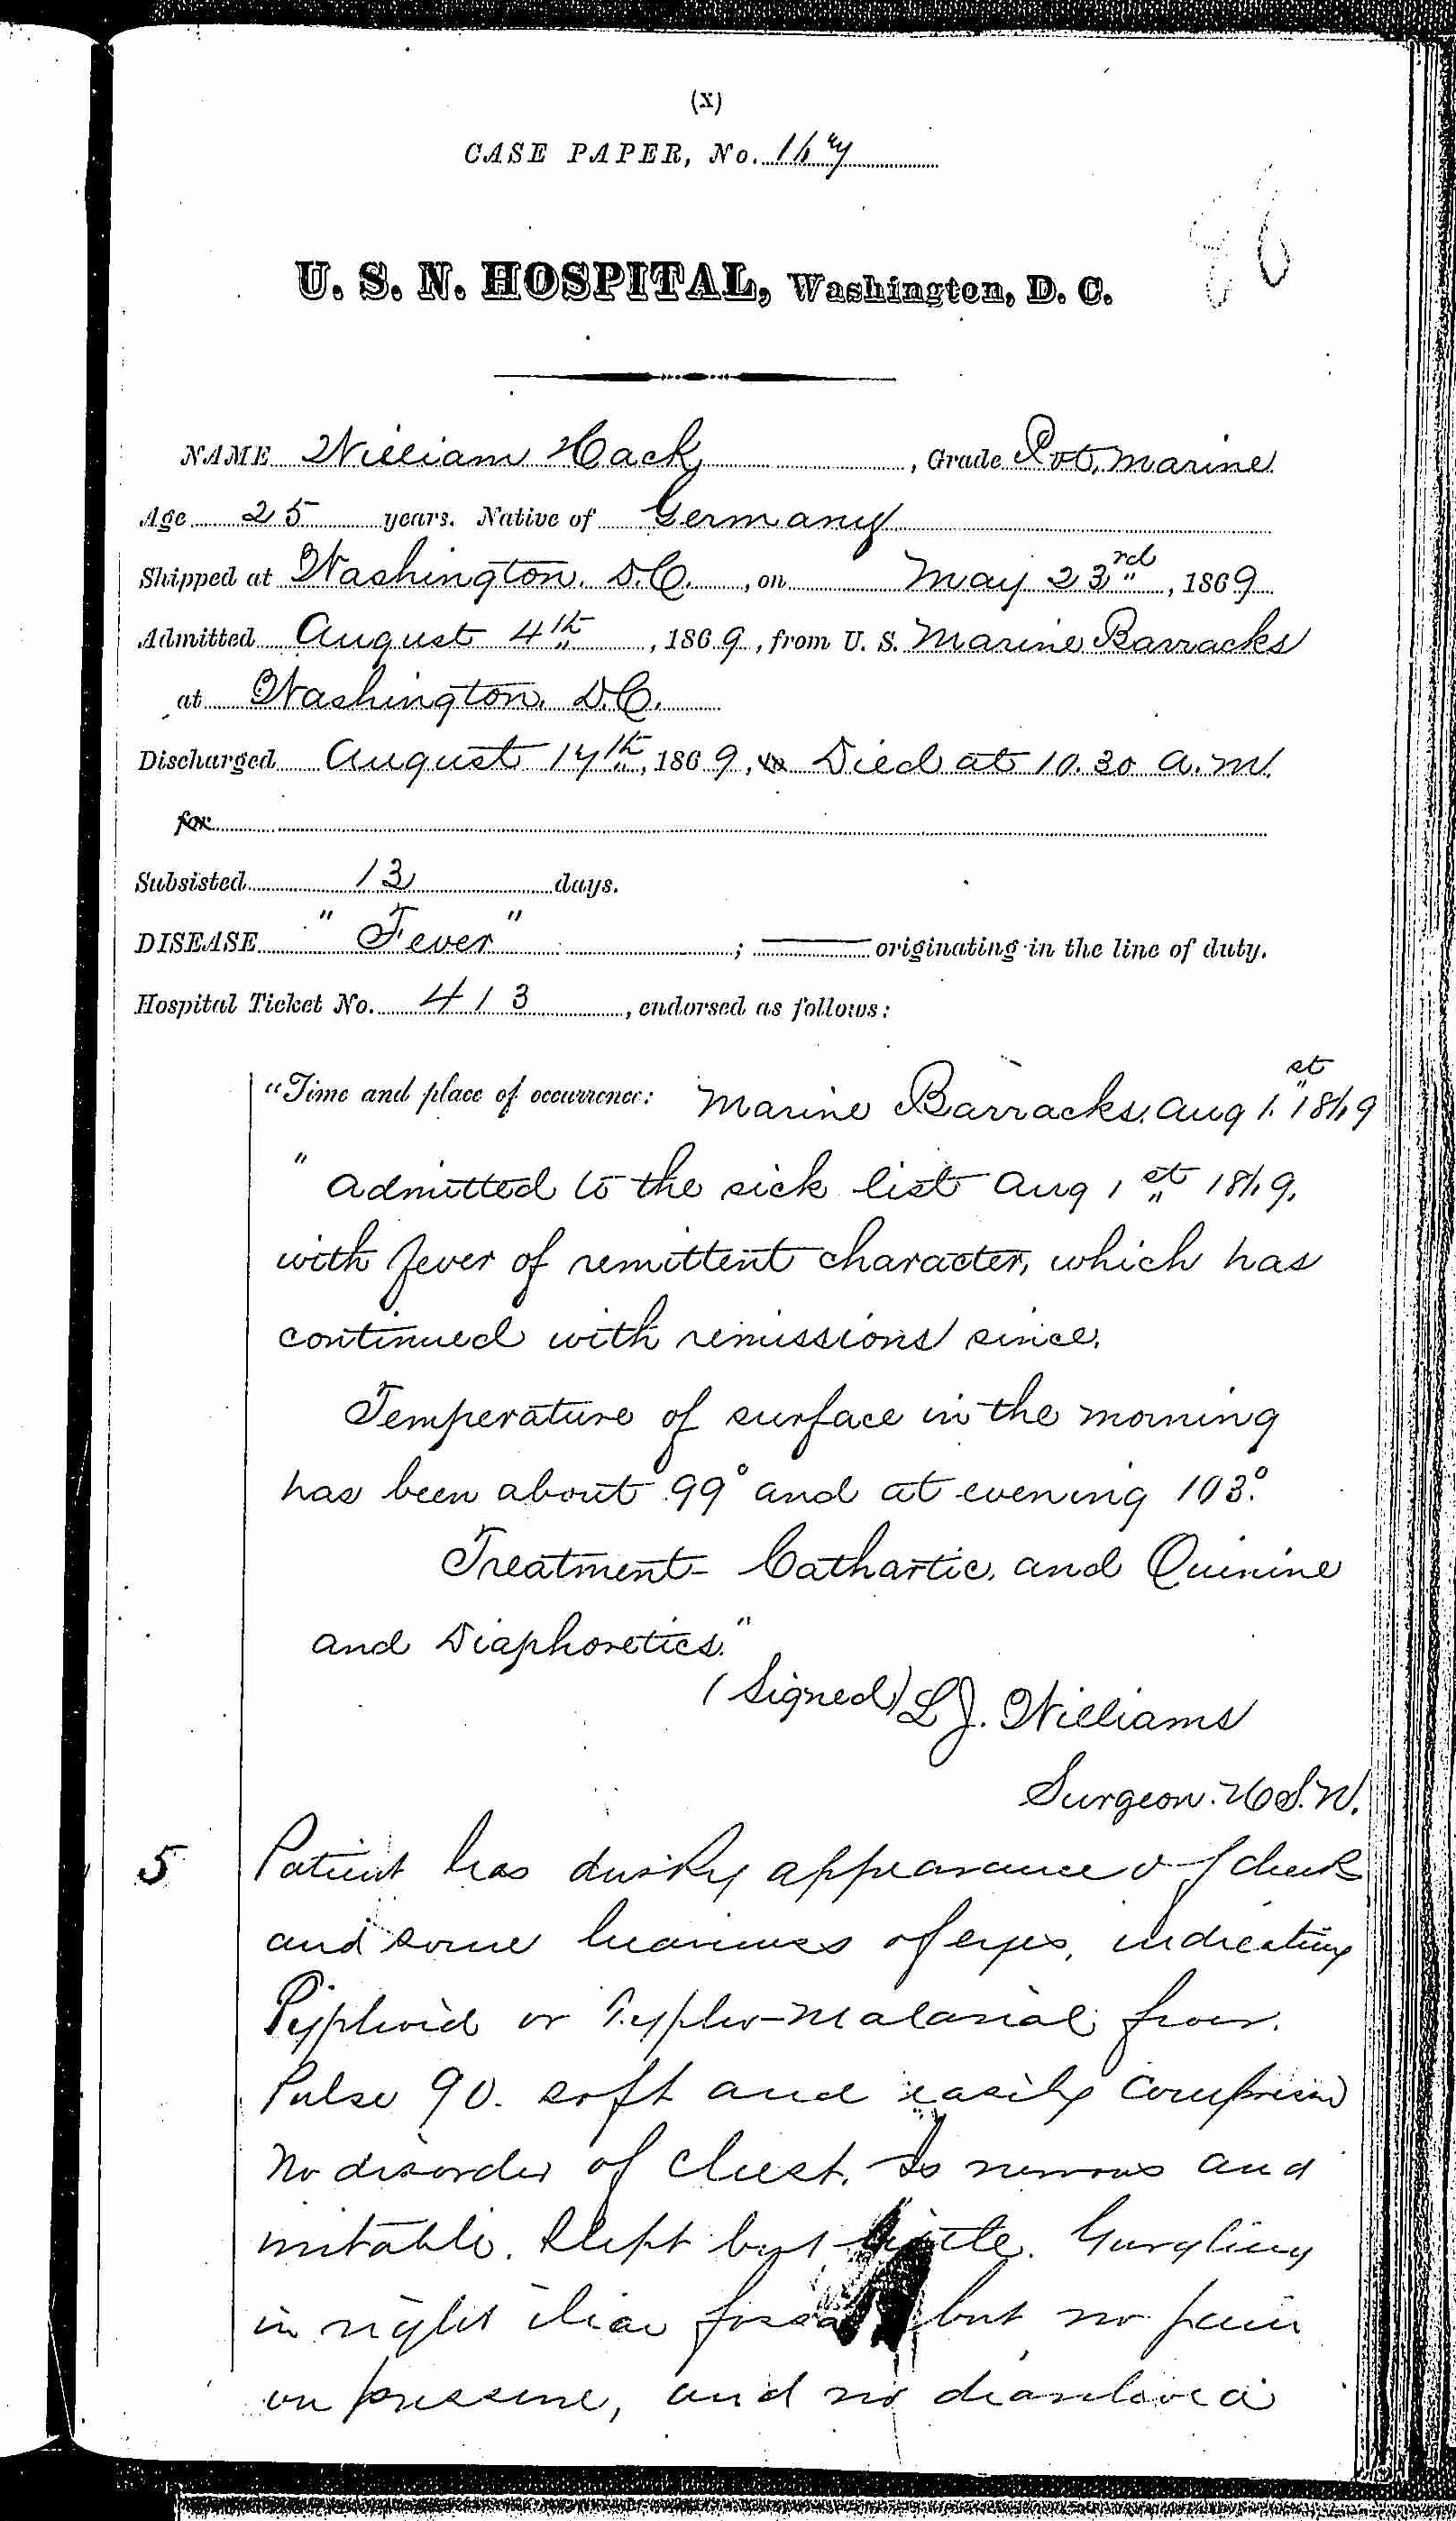 Entry for William Hack (page 1 of 7) in the log Hospital Tickets and Case Papers - Naval Hospital - Washington, D.C. - 1868-69